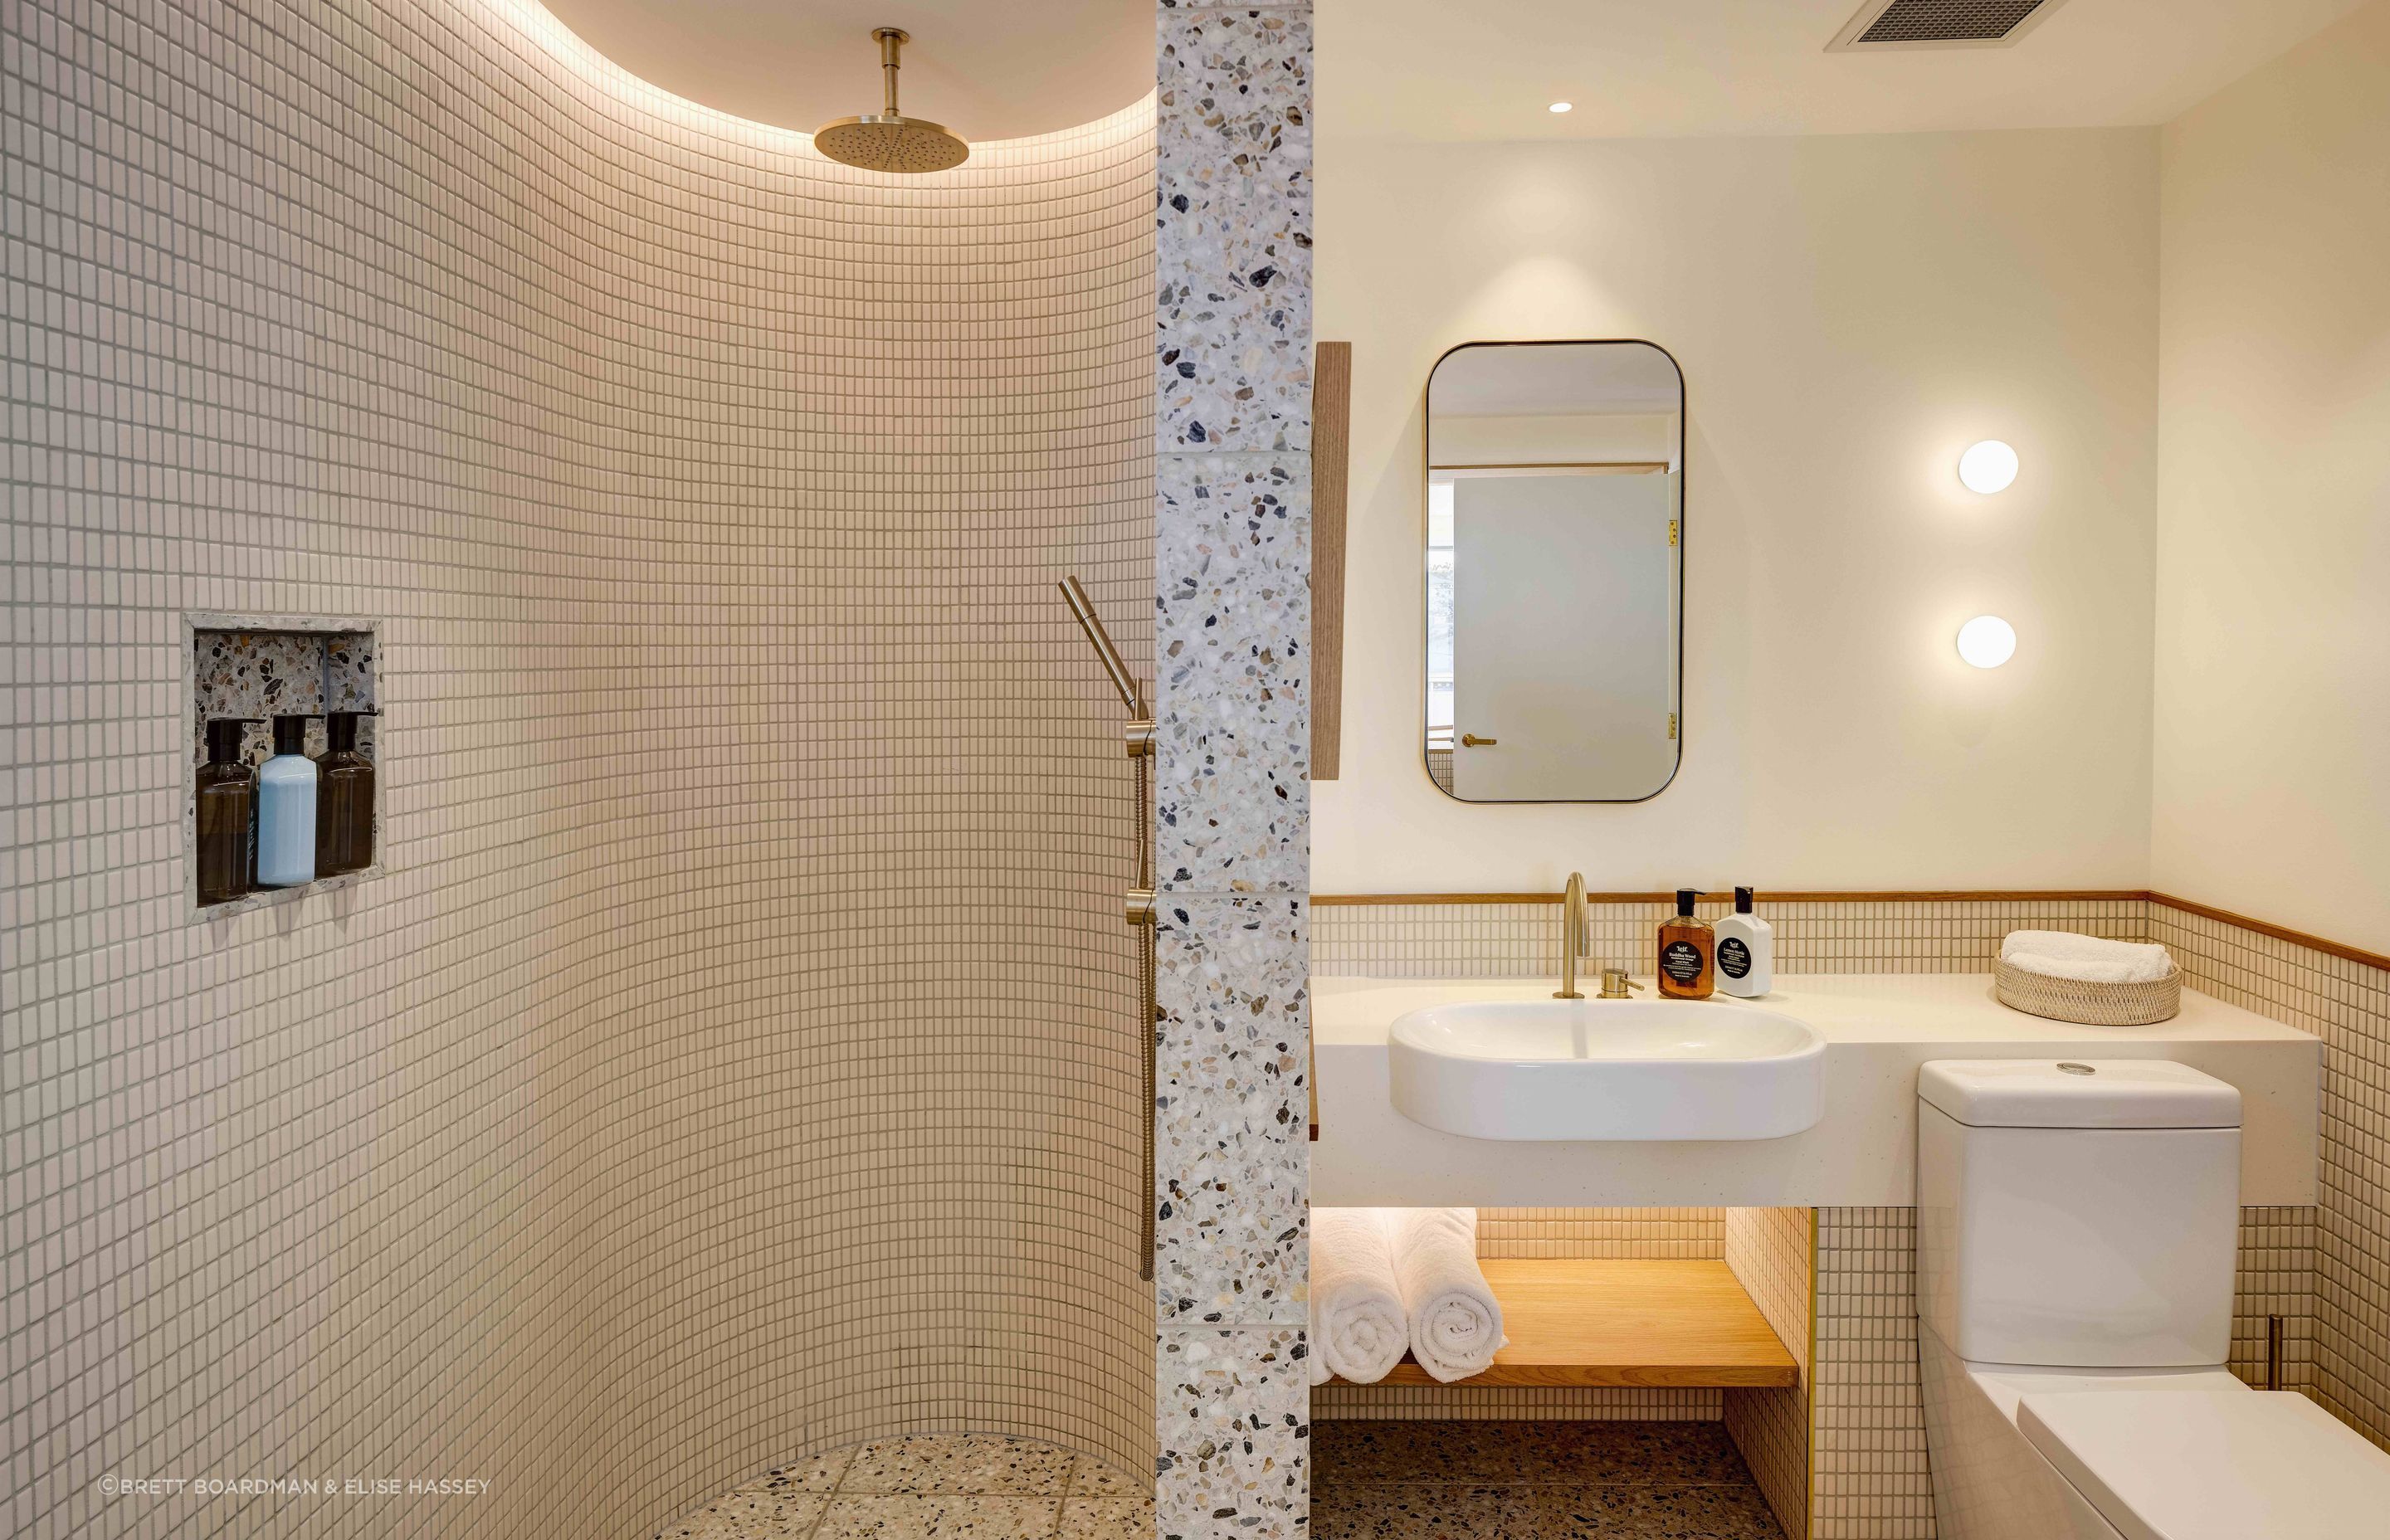 Task and indirect lighting optimise the guest experience in the Surf Hotel